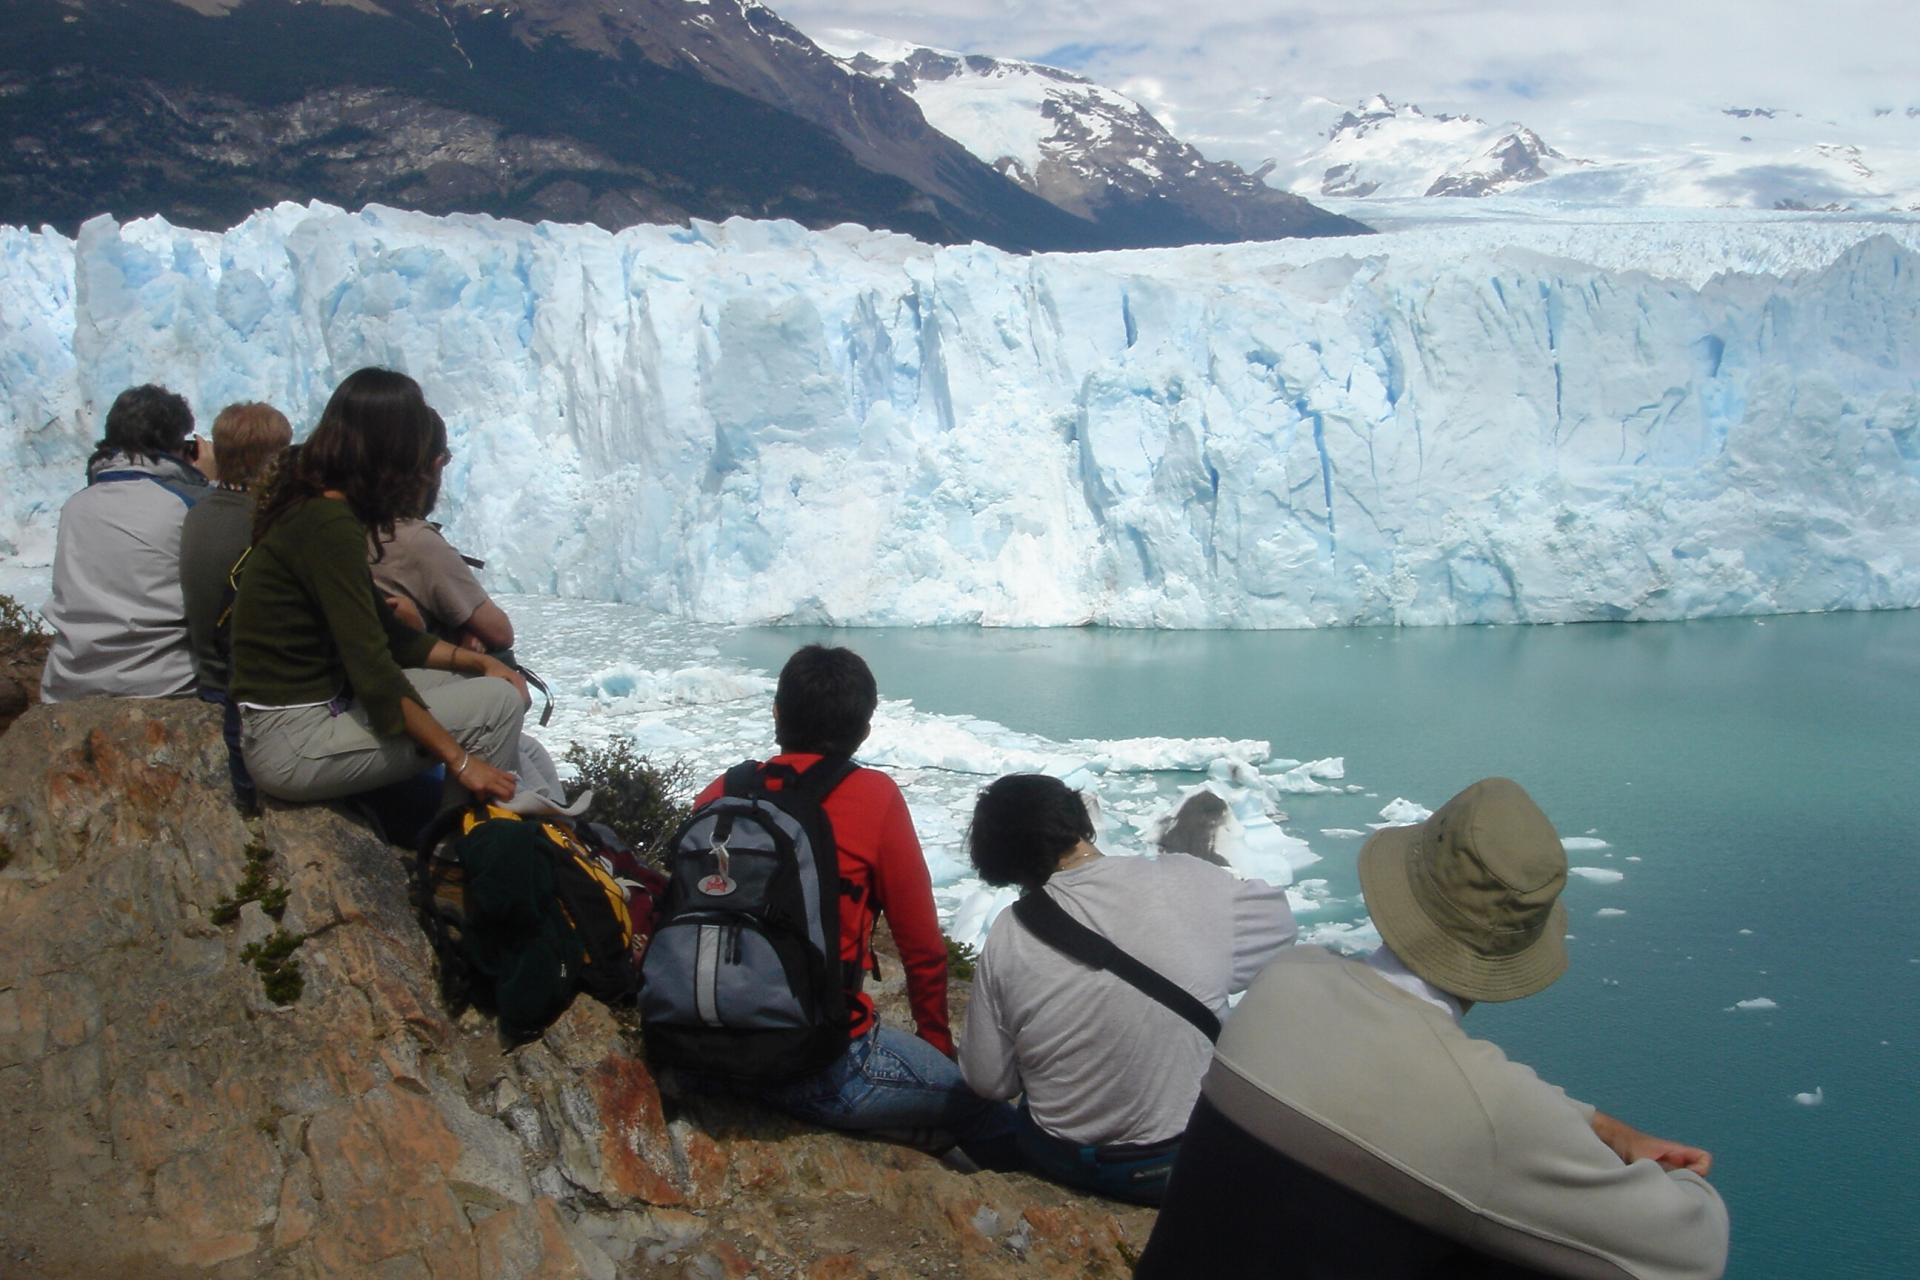 The vacation destination Patagonia is located in Brazil's neighboring country Argentina